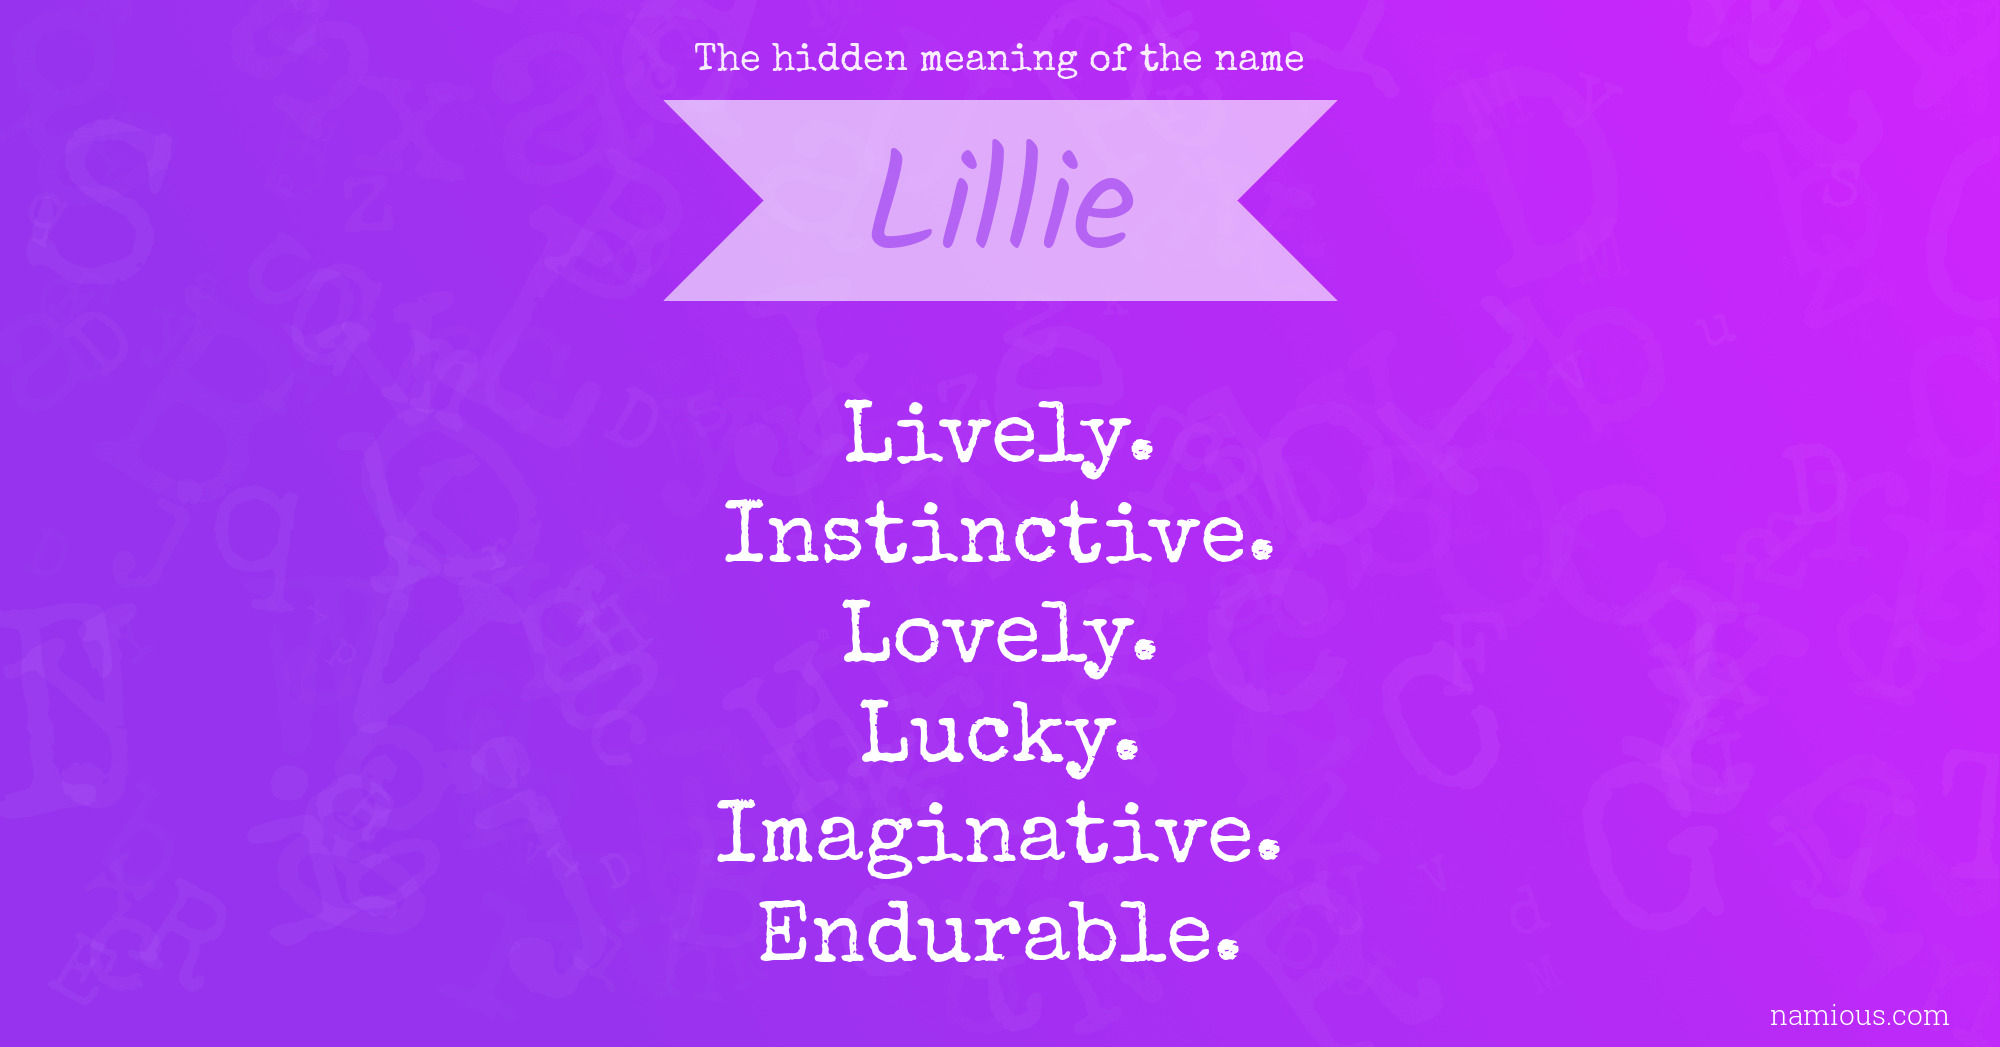 The hidden meaning of the name Lillie